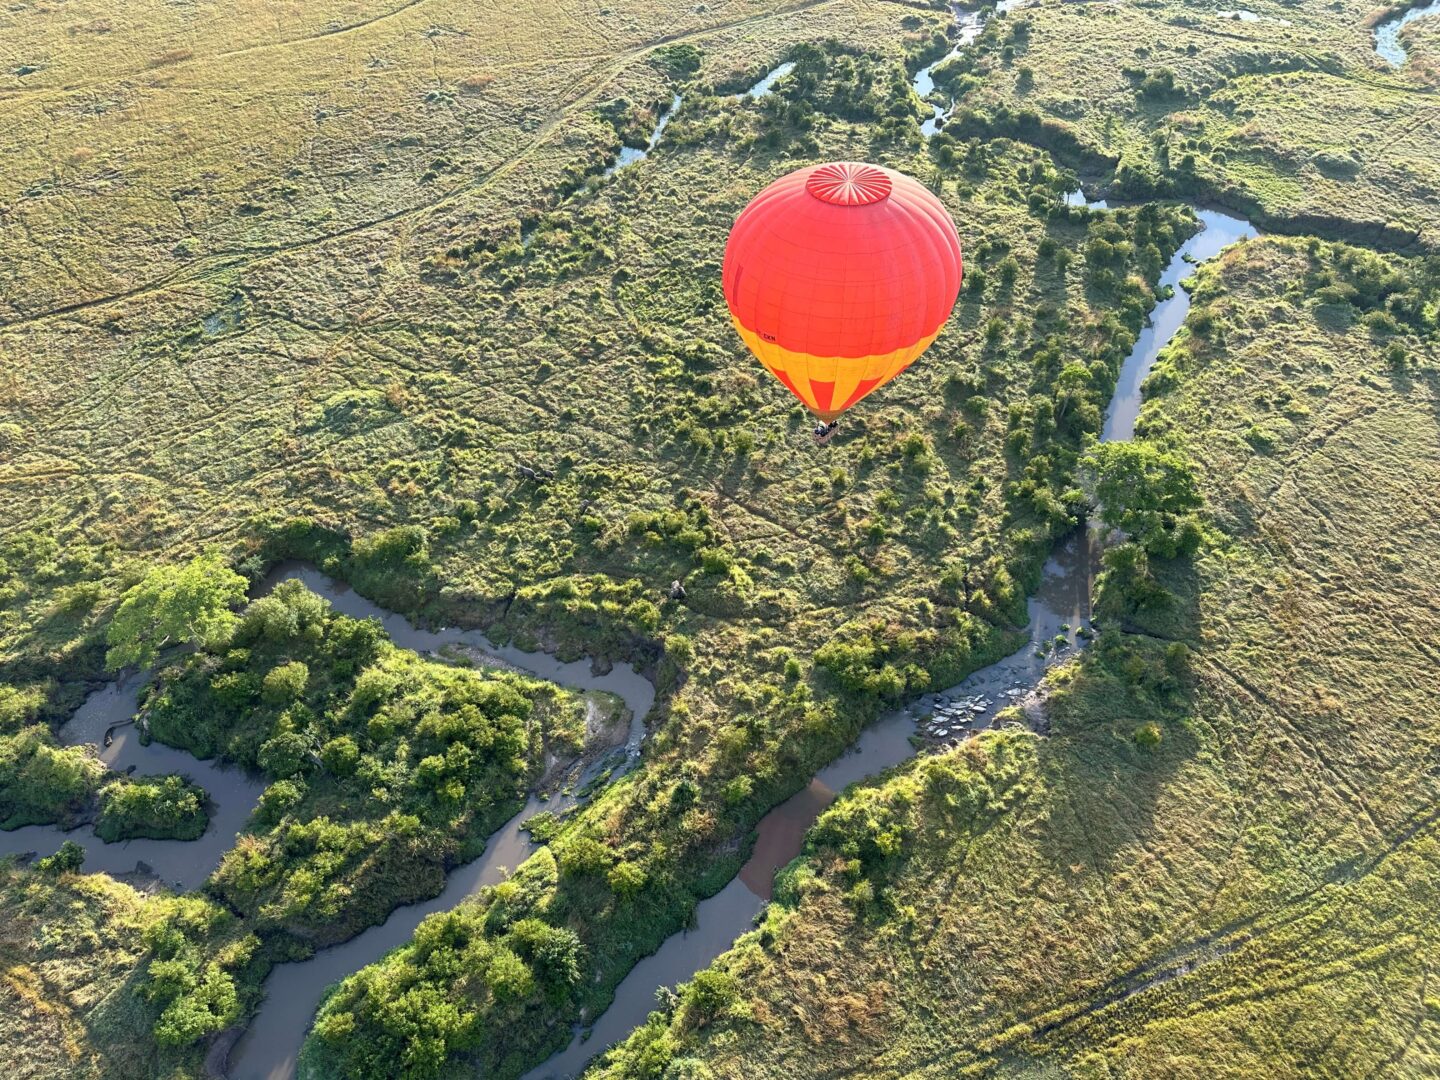 A view from a hot air balloon of a herd of elephants on the ground below. Another red hot air balloon is also seen.